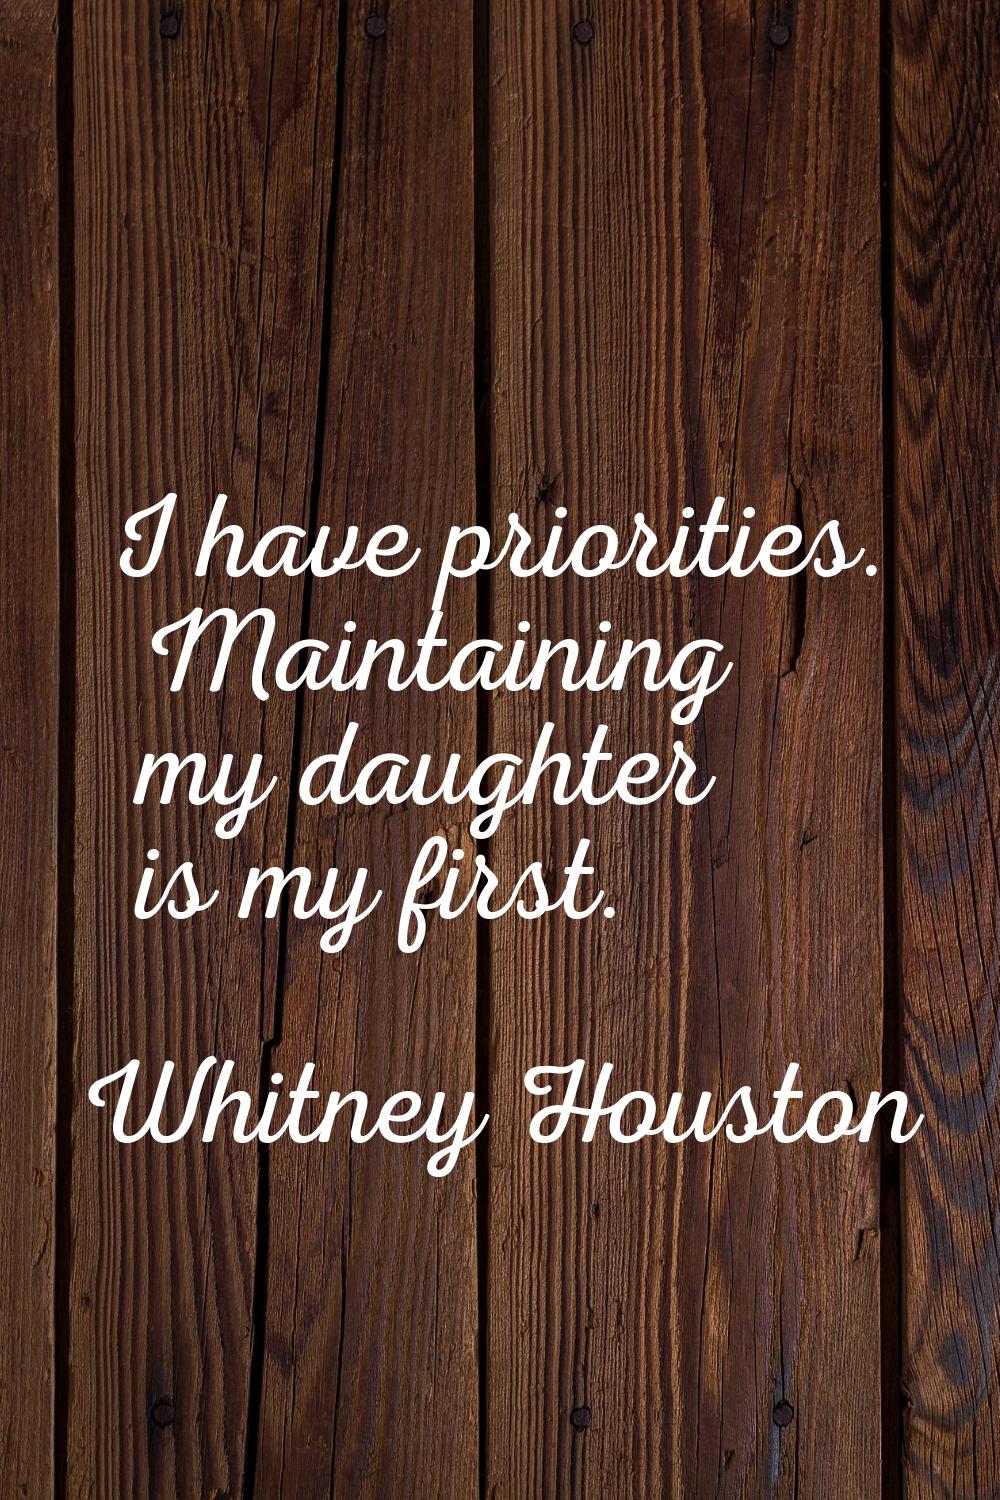 I have priorities. Maintaining my daughter is my first.